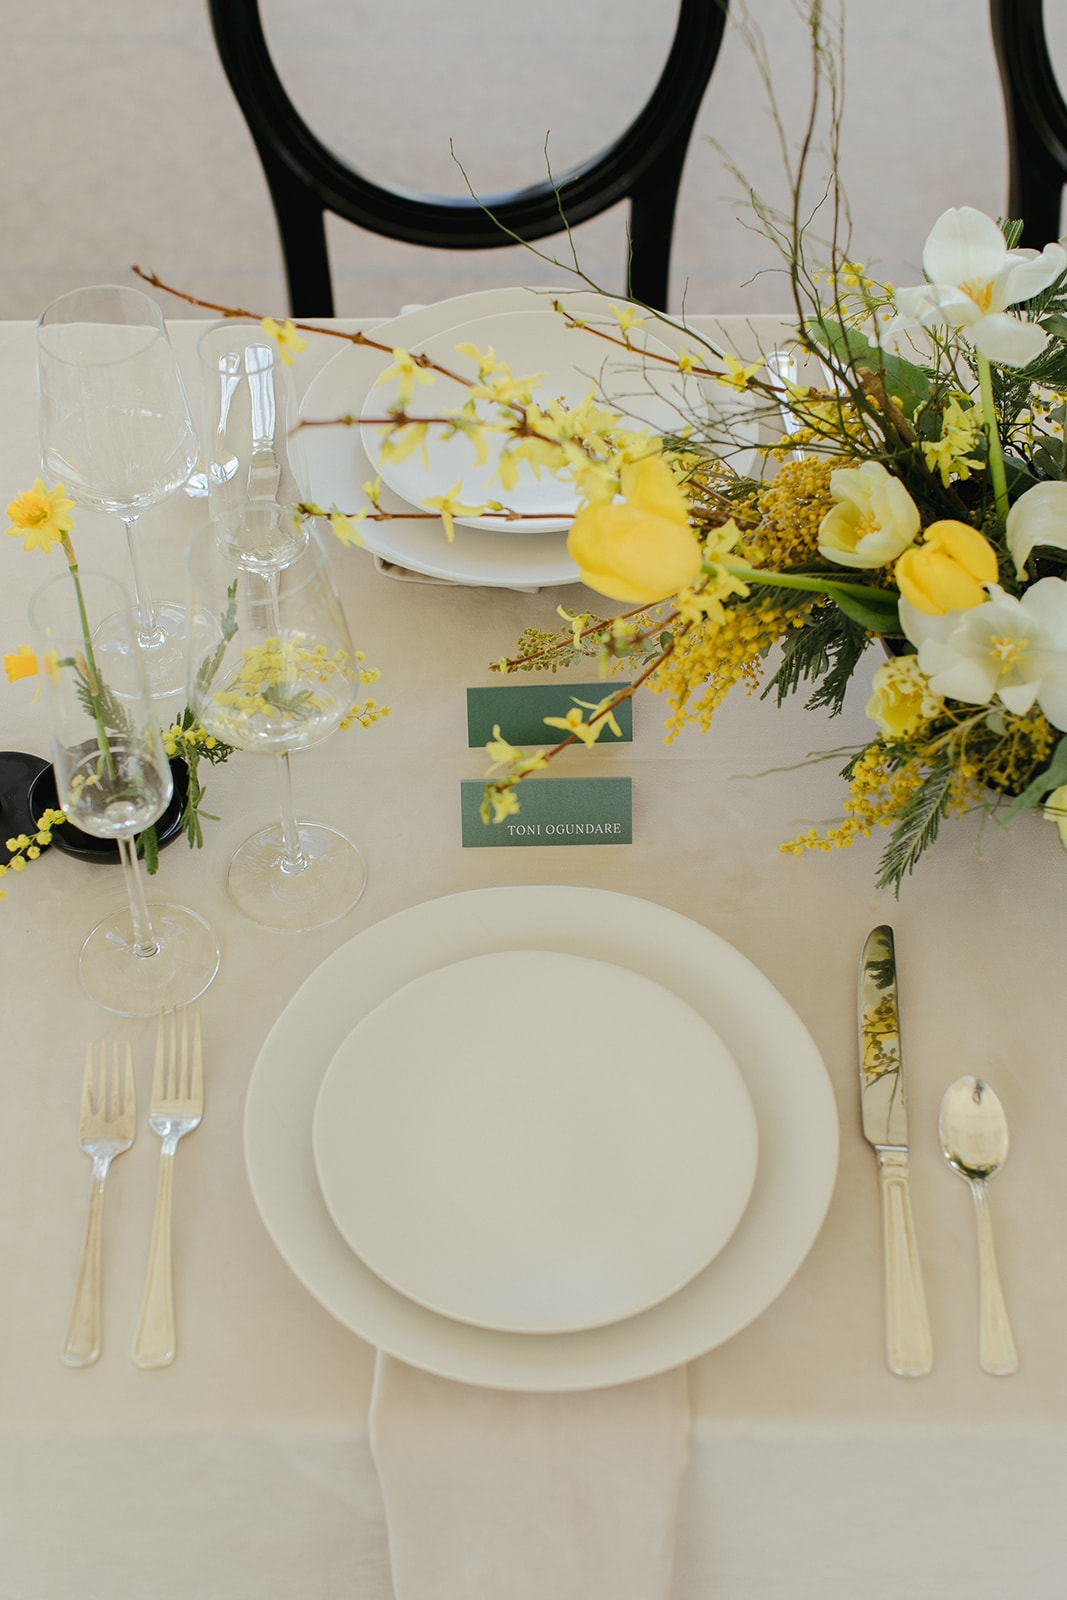 white and yellow place setting idea